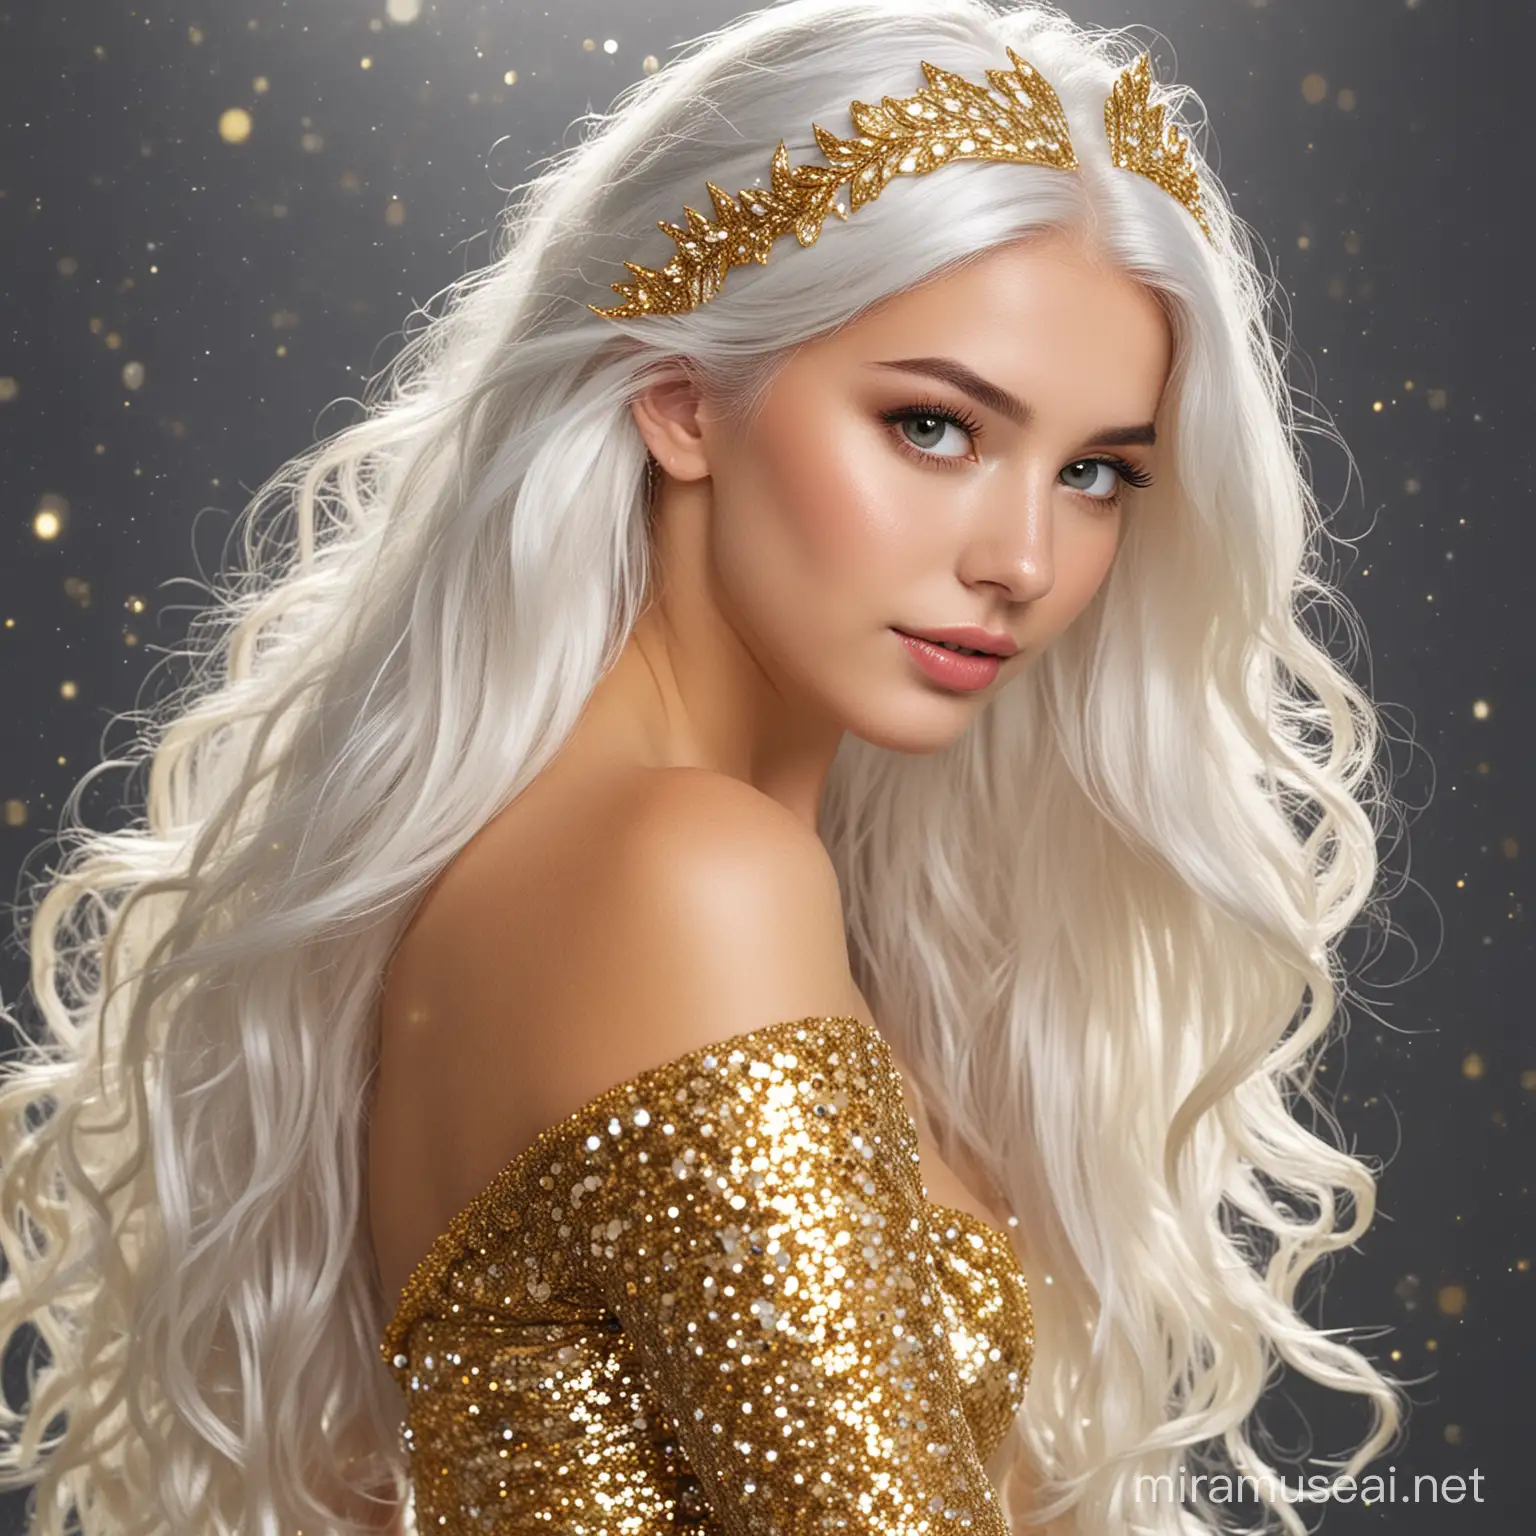 Shimmering Mermaid with Glittering Golden Tail and White Hair